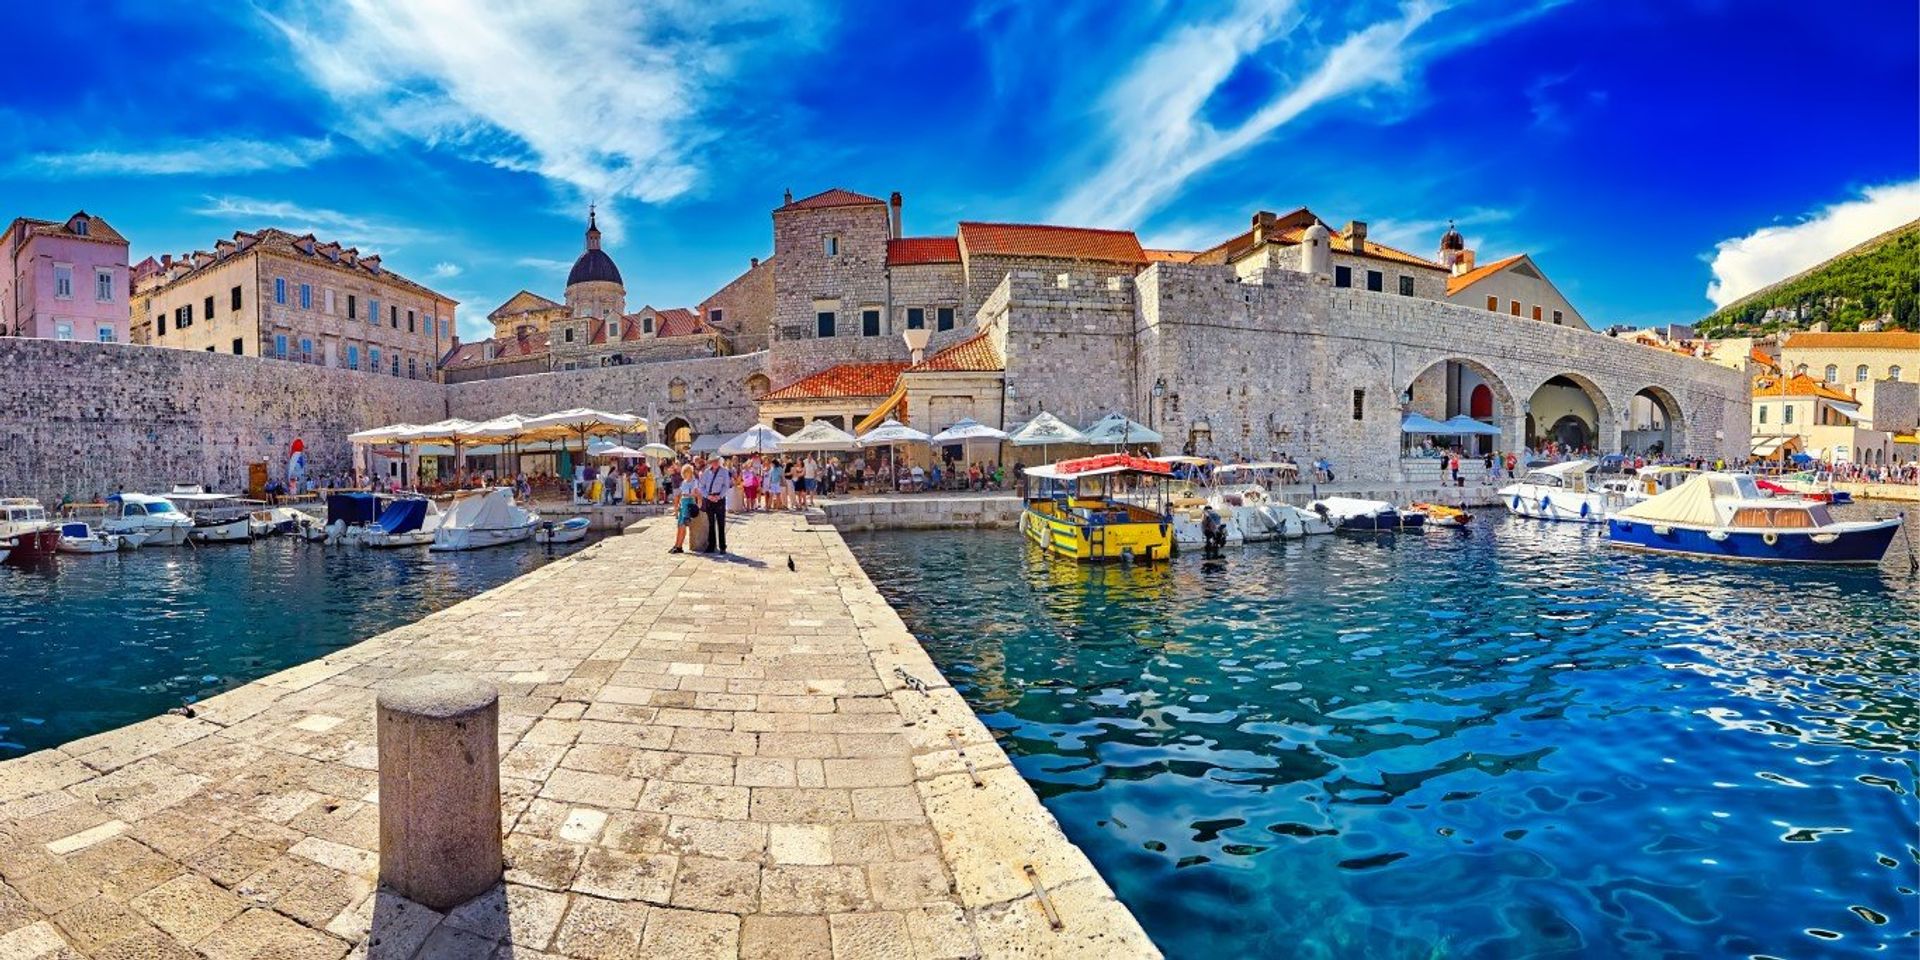 Dubrovnik's old town is dotted with stylish restaurants, cafes and bars